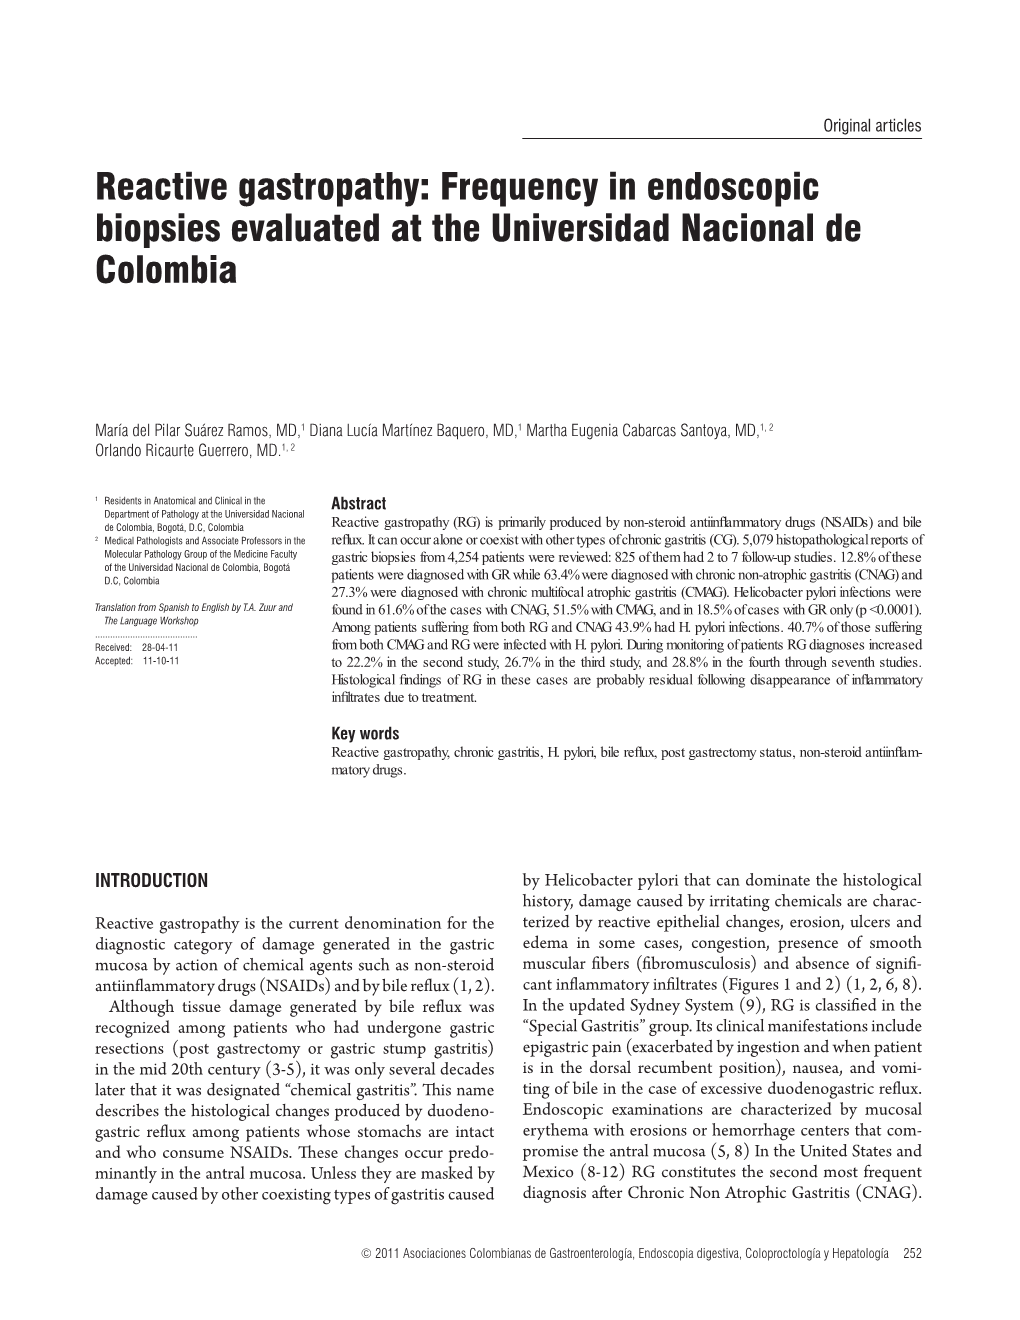 Reactive Gastropathy: Frequency in Endoscopic Biopsies Evaluated at the Universidad Nacional De Colombia